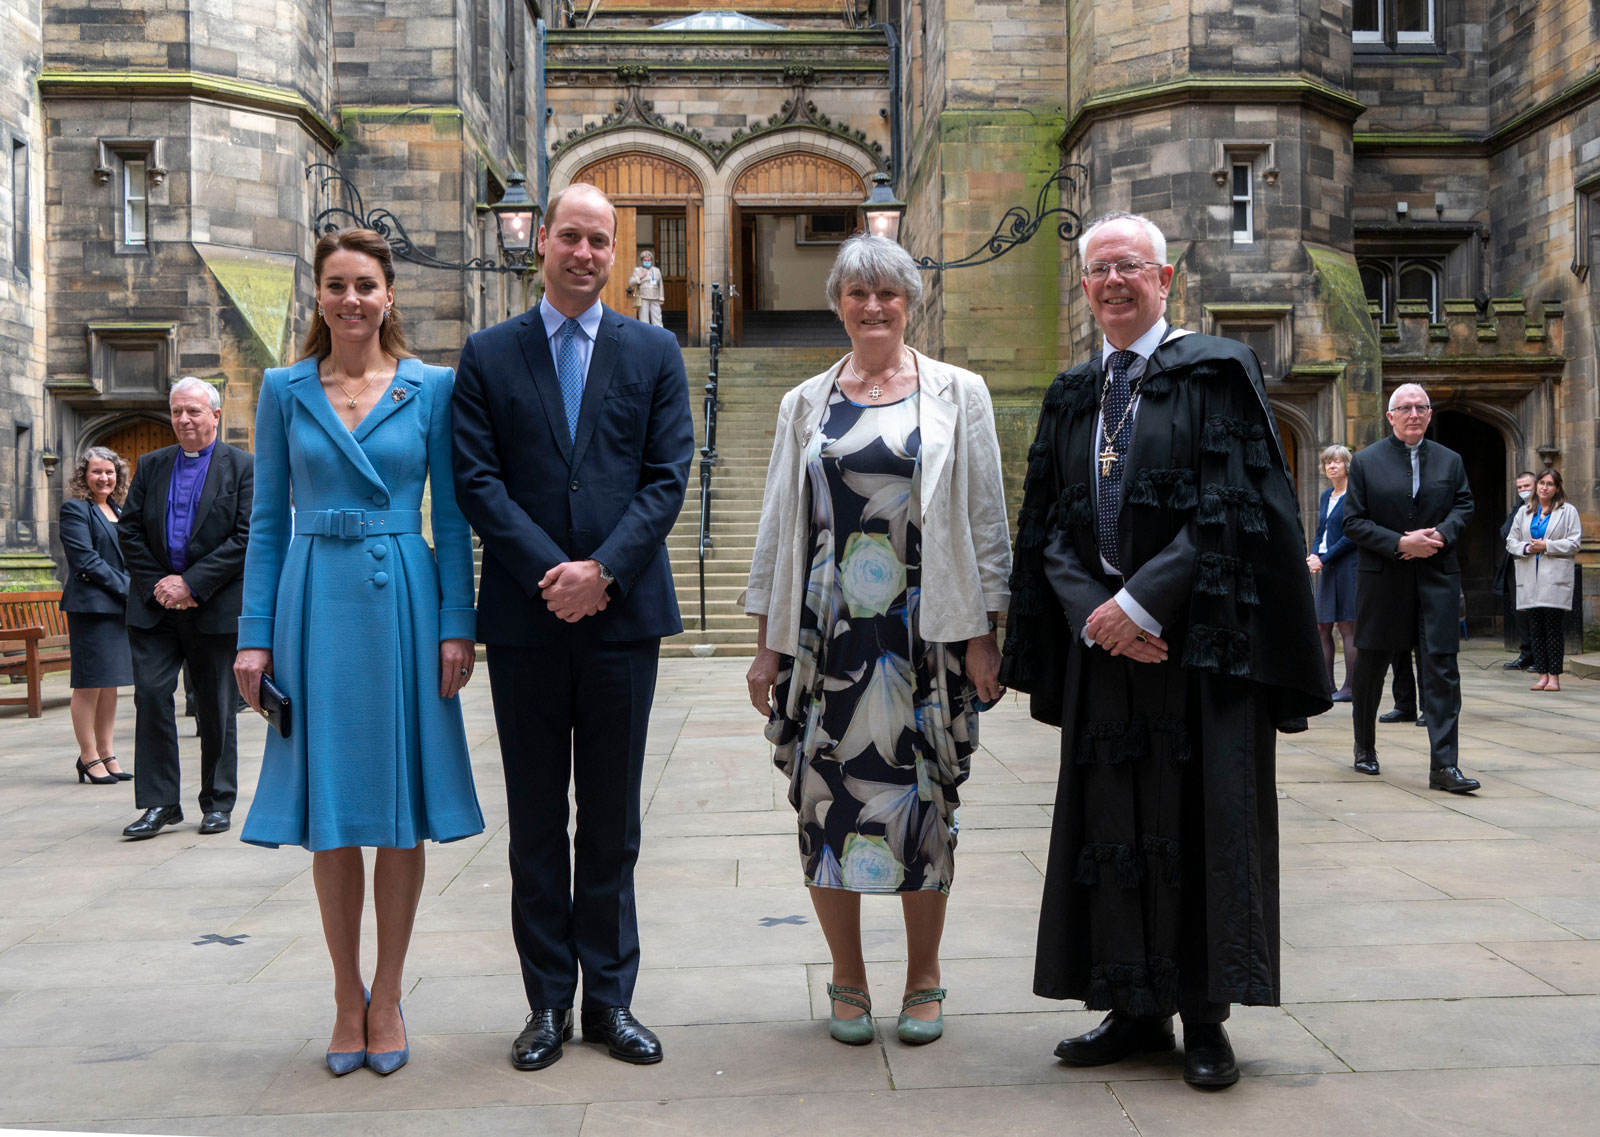 The Earl and Countess of Strathearn with the Moderator and Lady Wallace